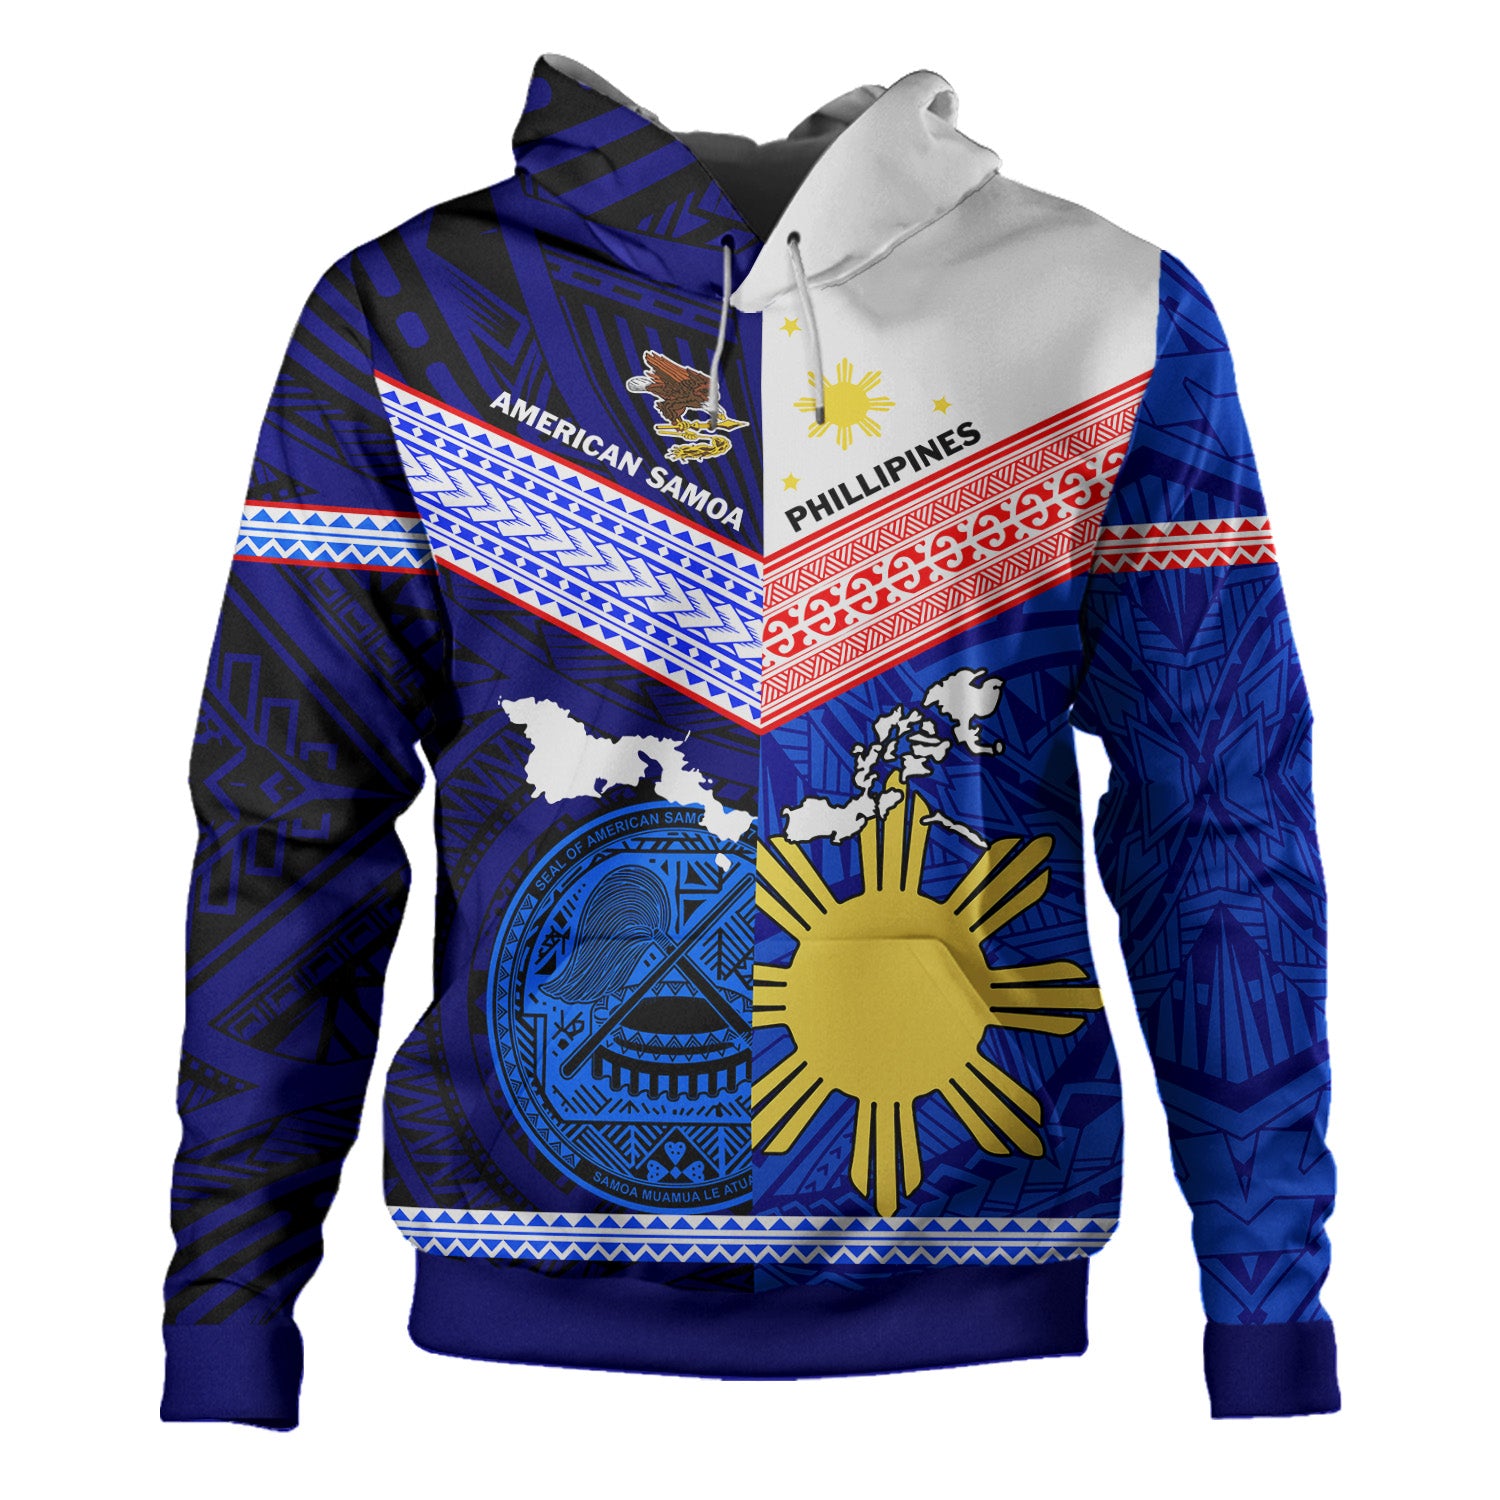 Philippines and American Samoa Hoodie Mix Country Polynesian Tribal Style Pullover Hoodie Blue - Polynesian Pride